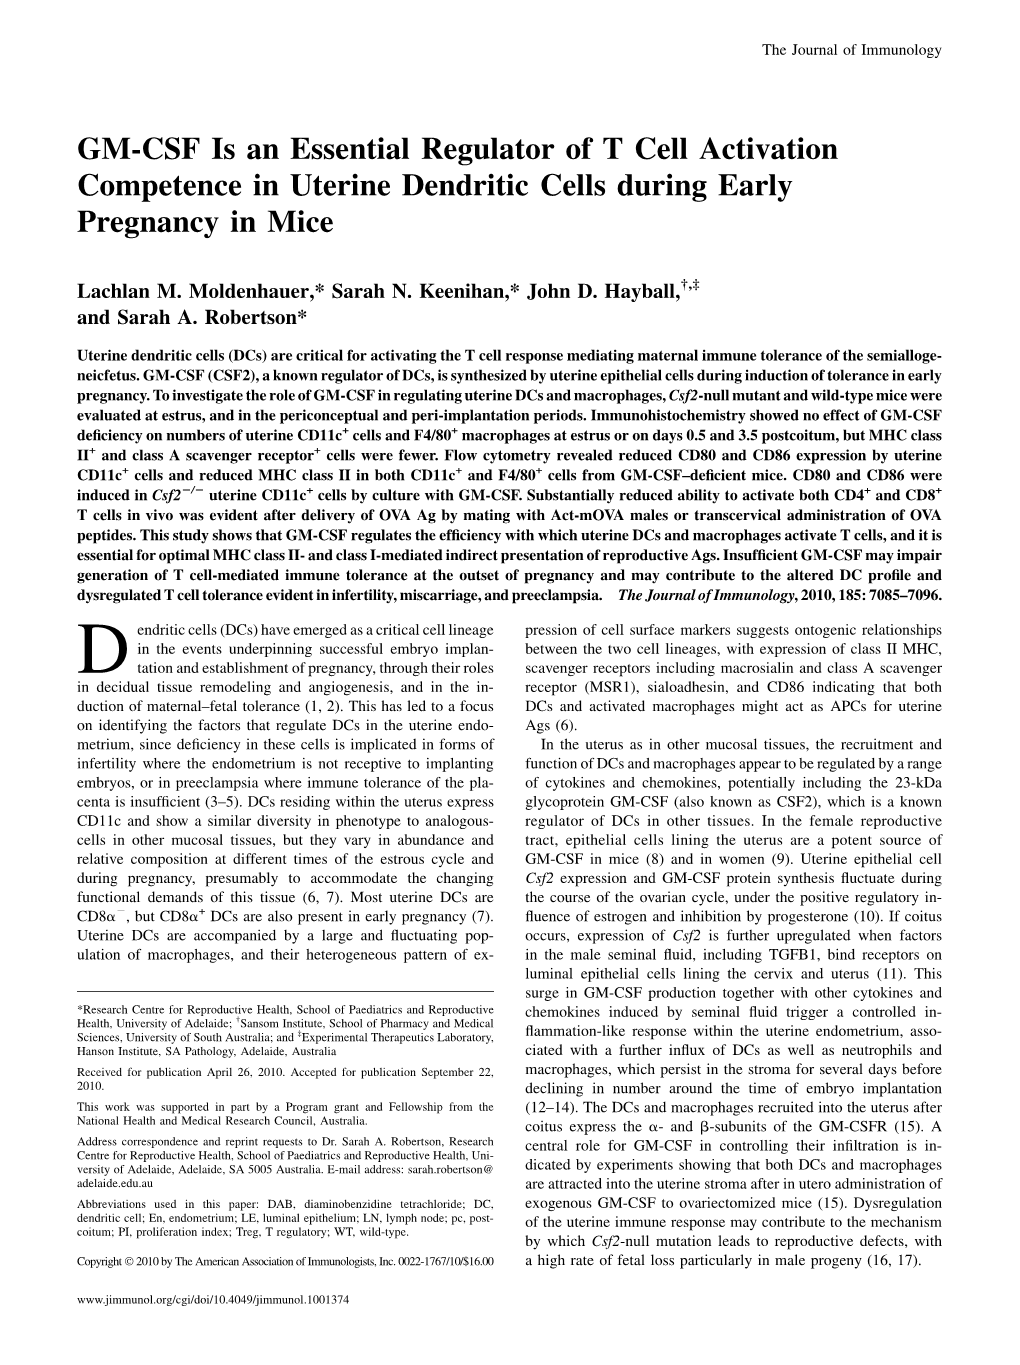 Cells During Early Pregnancy in Mice Activation Competence in Uterine